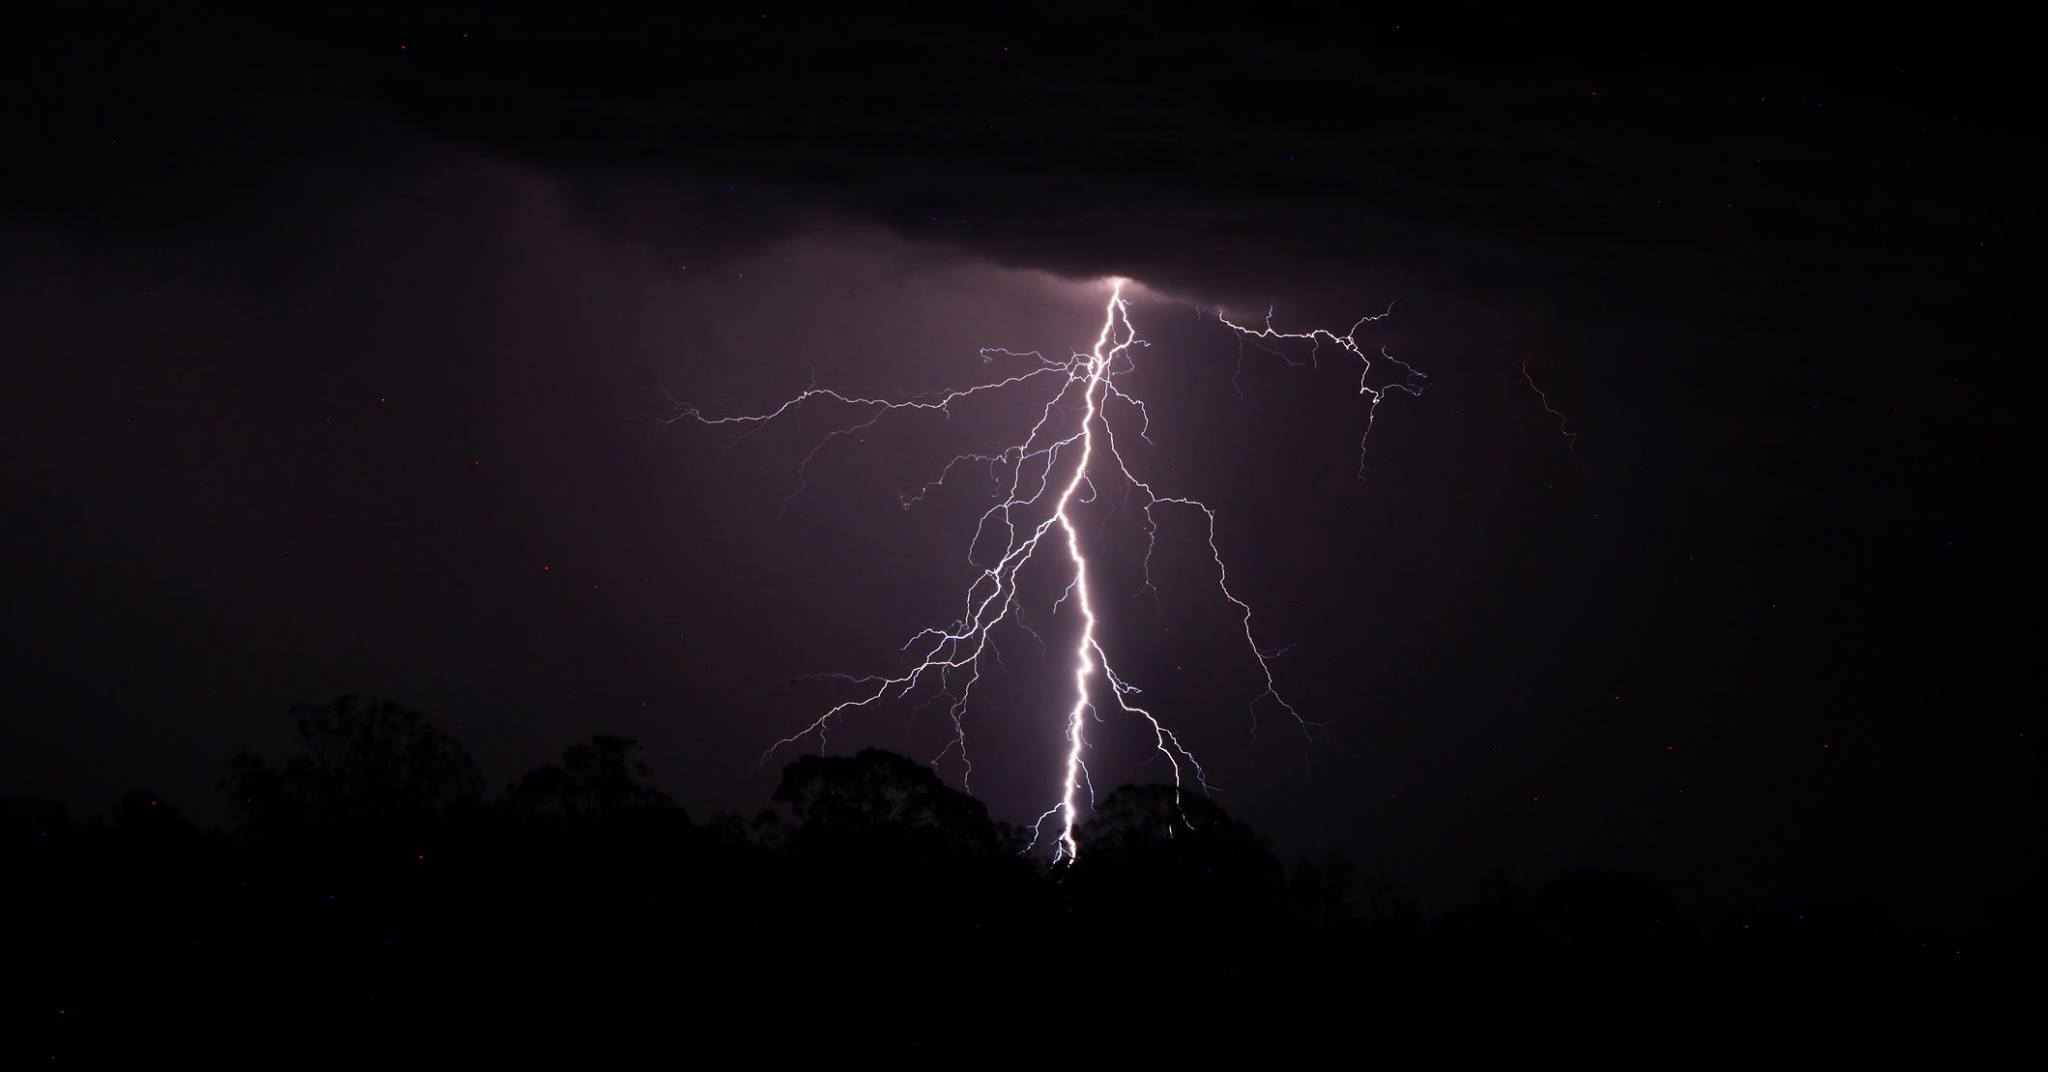 Storms and Lightning Warwick Queensland 21st December 2016 - Extreme Storms2048 x 1072